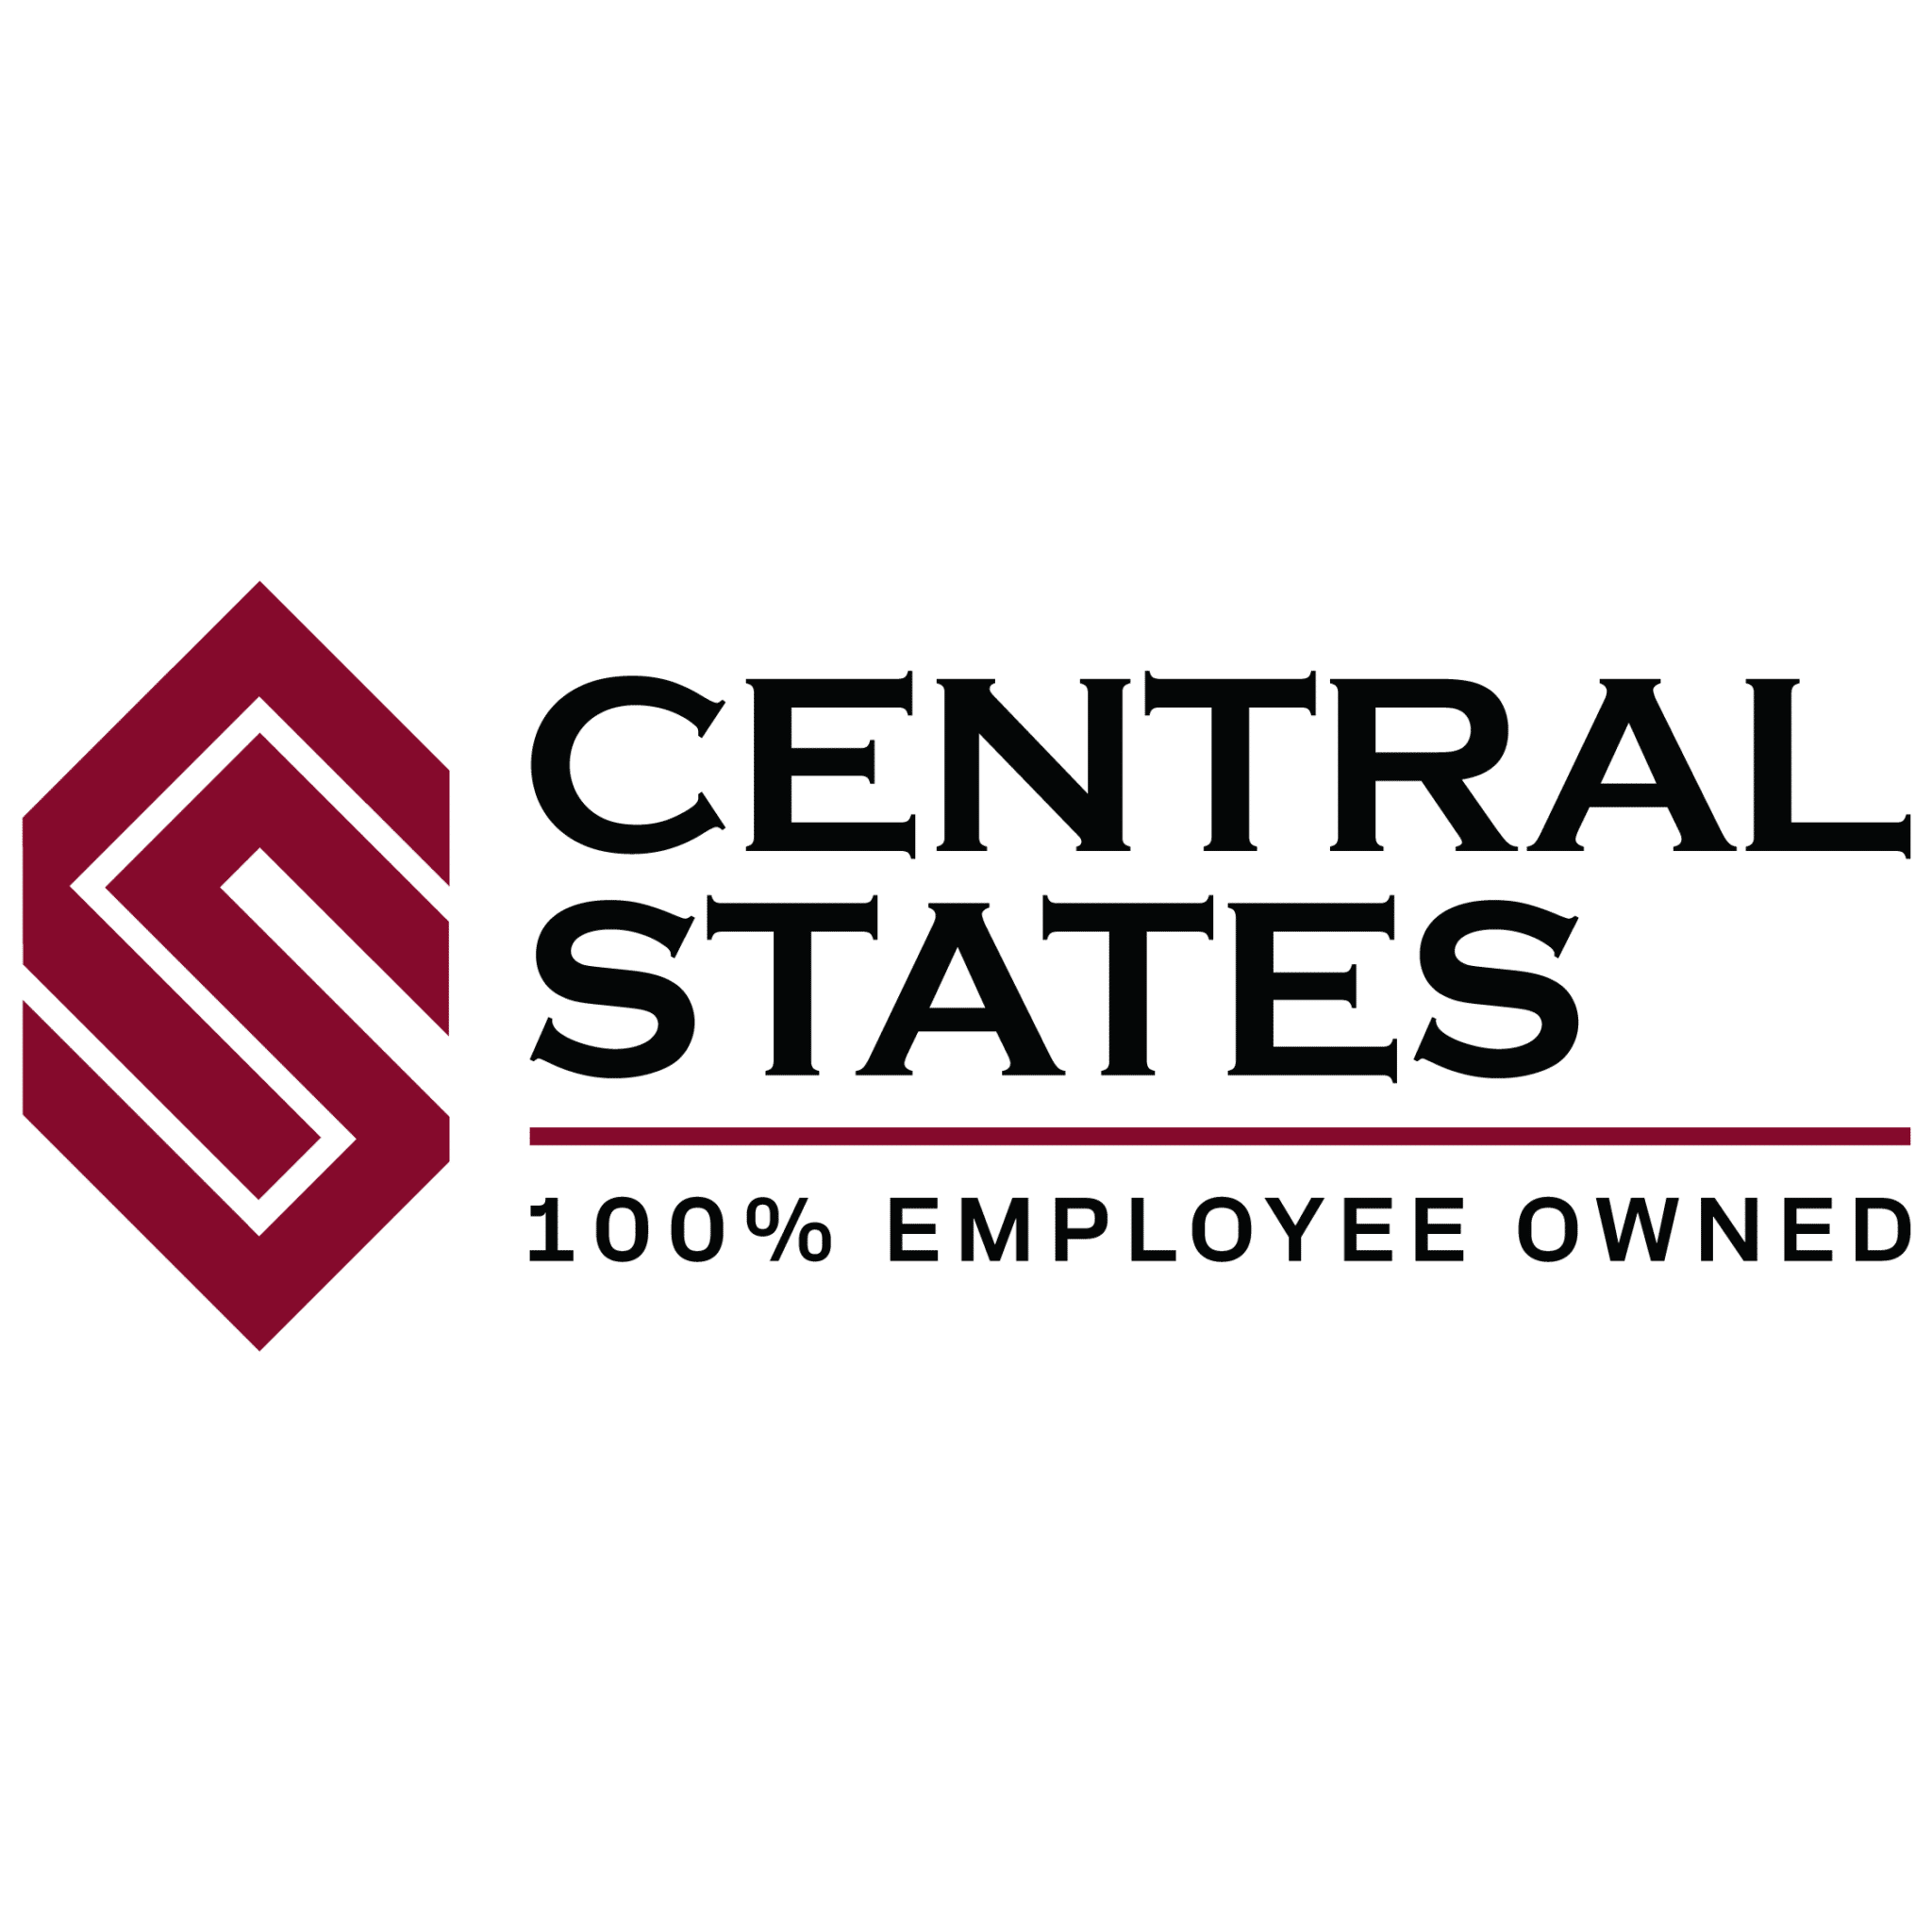 Central States logo, with 100 percent employee owned